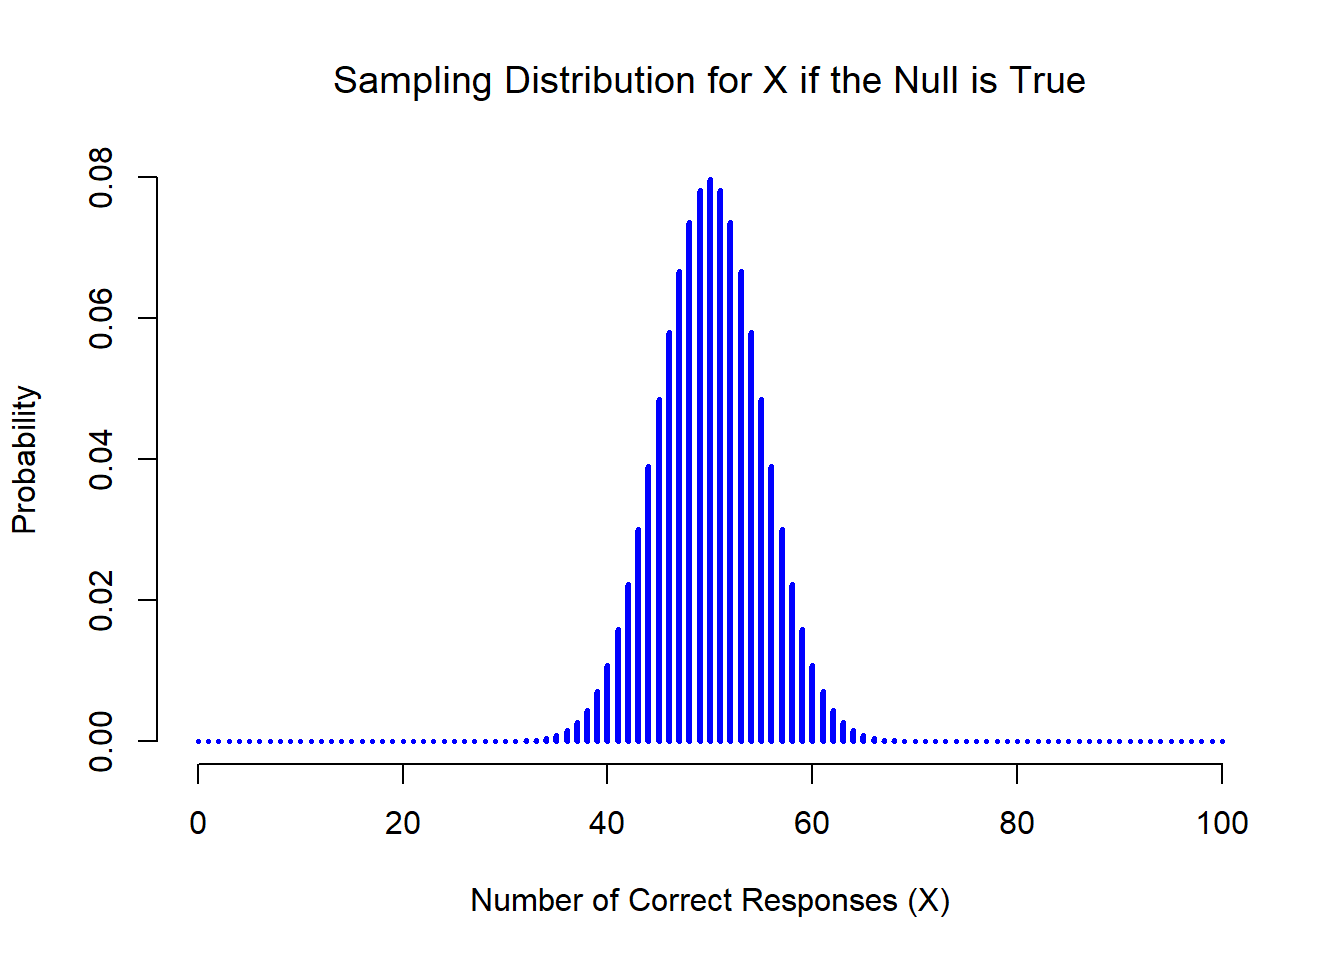 The sampling distribution for our test statistic $X$ when the null hypothesis is true. For our ESP scenario, this is a binomial distribution. Not surprisingly, since the null hypothesis says that the probability of a correct response is $\theta = .5$, the sampling distribution says that the most likely value is 50 (our of 100) correct responses. Most of the probability mass lies between 40 and 60.